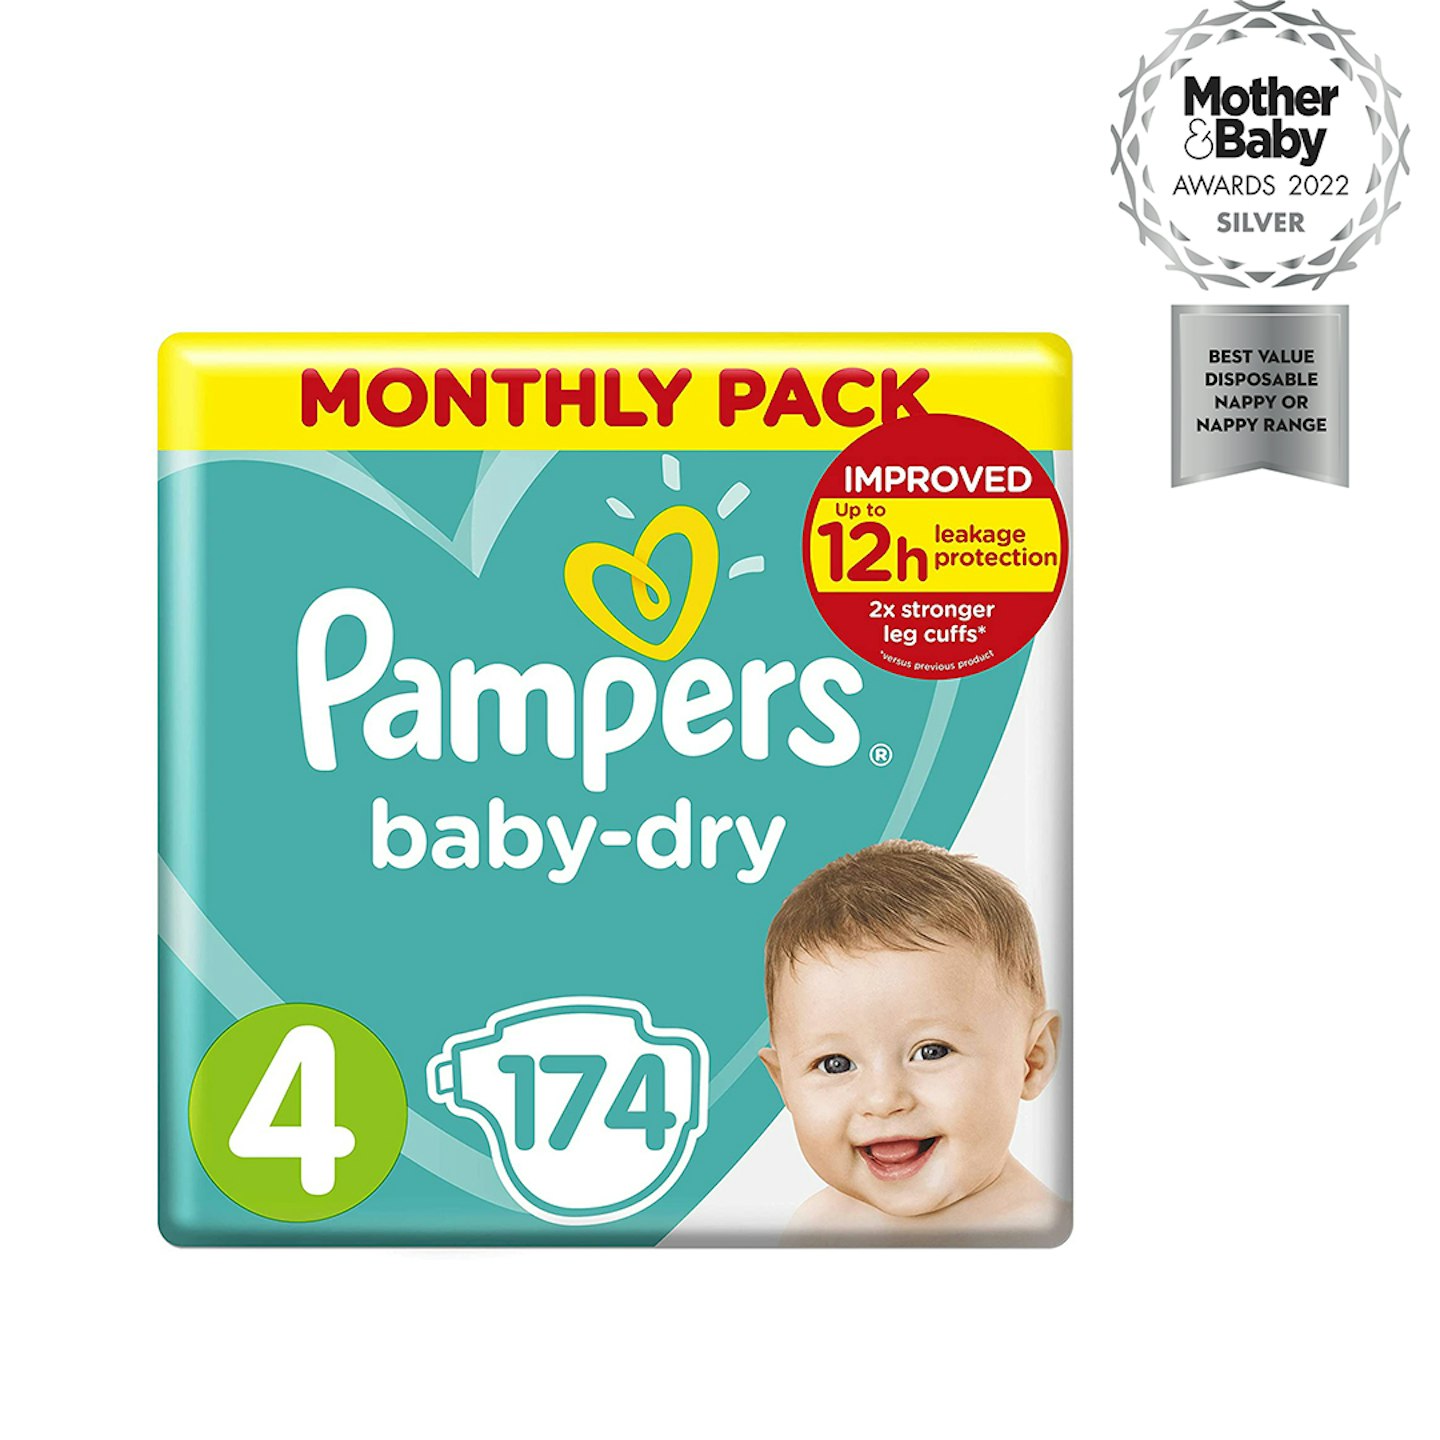 Baby-Dry range from Pampers